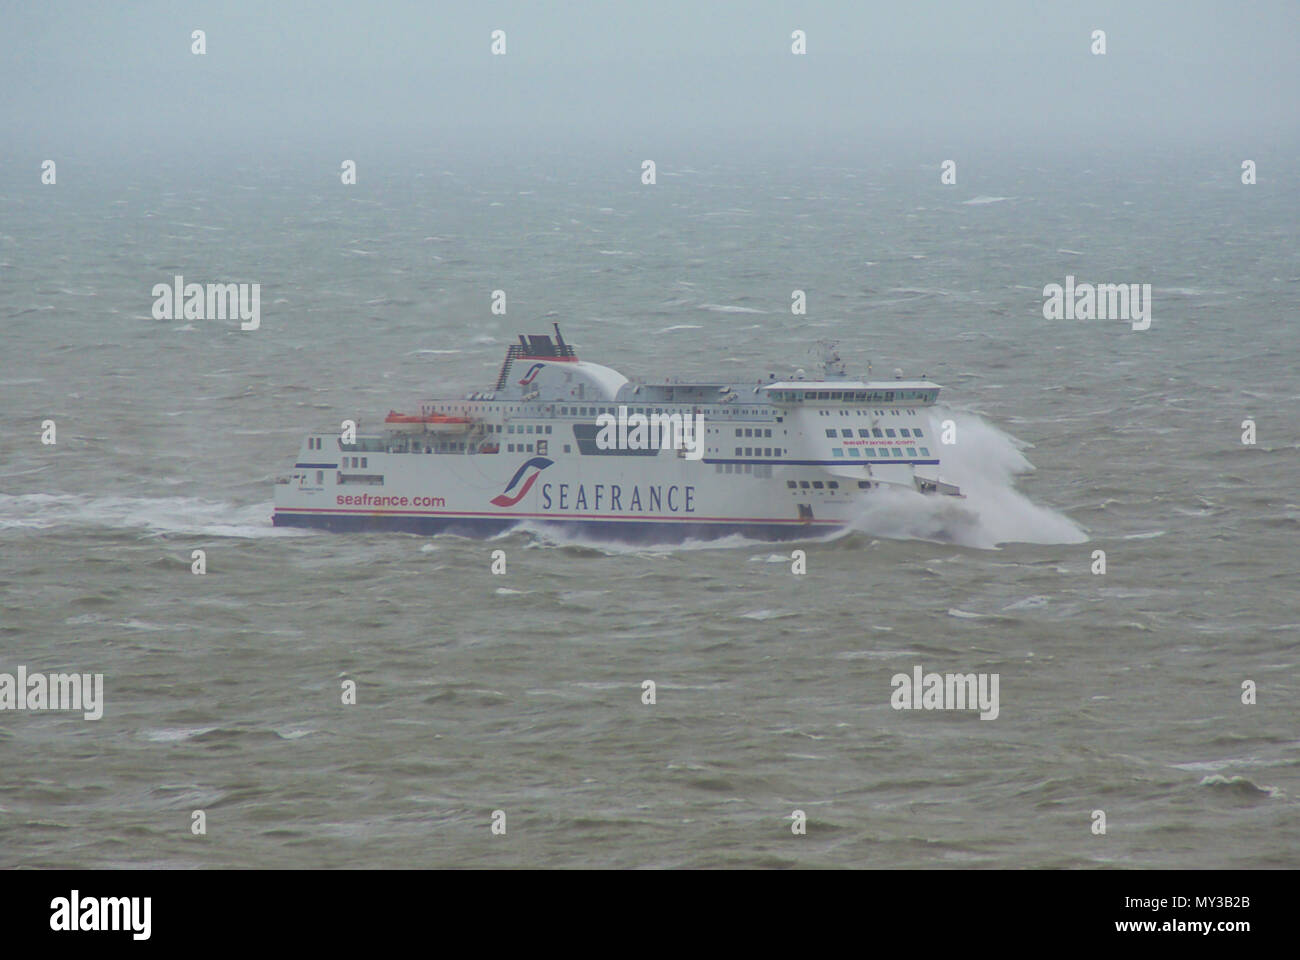 Sea France cross channel ferry struggling in bad weather in English Channel. Waves crashing over the front. Heavy swell approaching Dover, Kent, UK Stock Photo